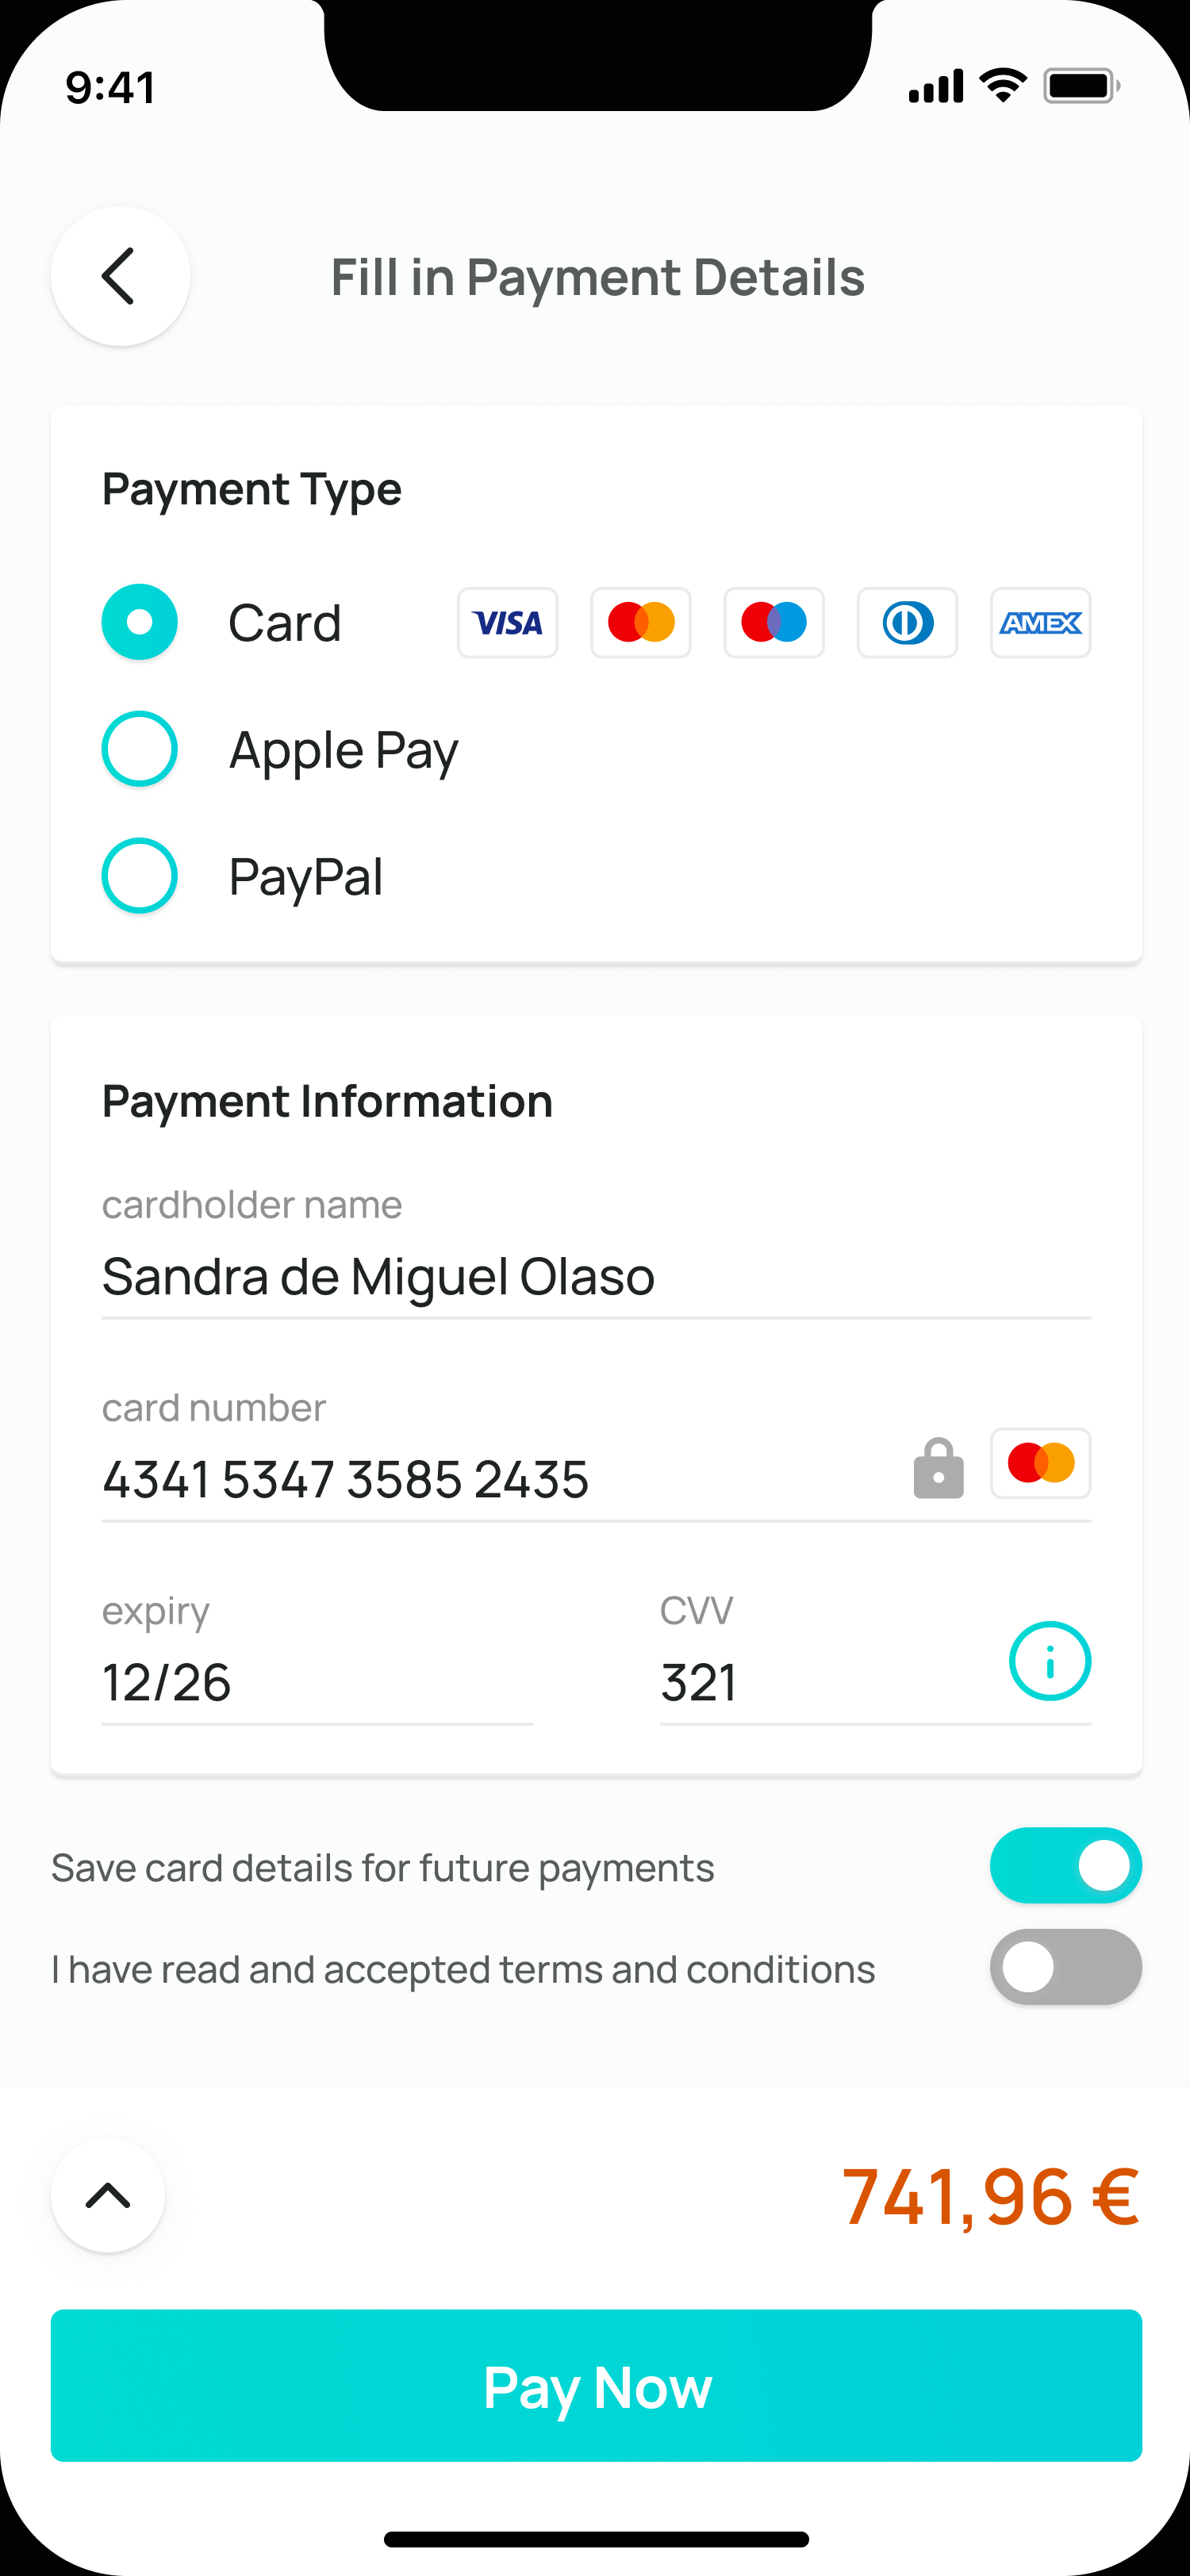 21-fill-payment-details